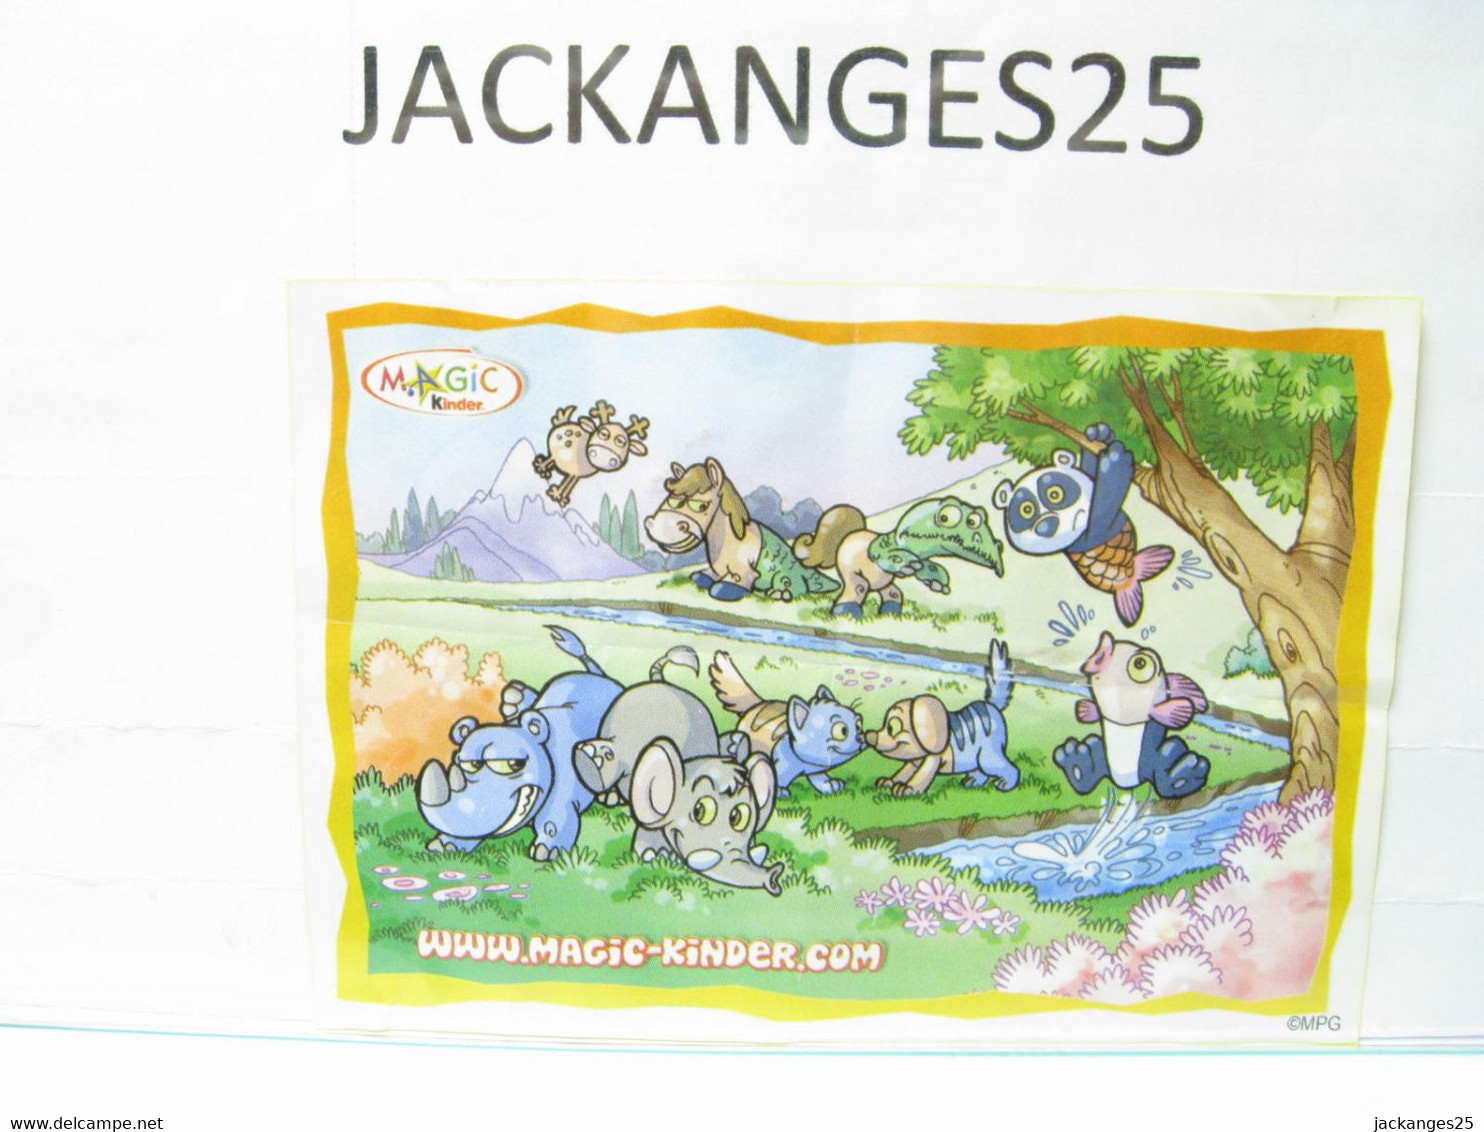 KINDER MPG NV 44 A RHINOCEROS ANIMAUX NATURE NATOONS TIERE 2008 + BPZ A - Familien